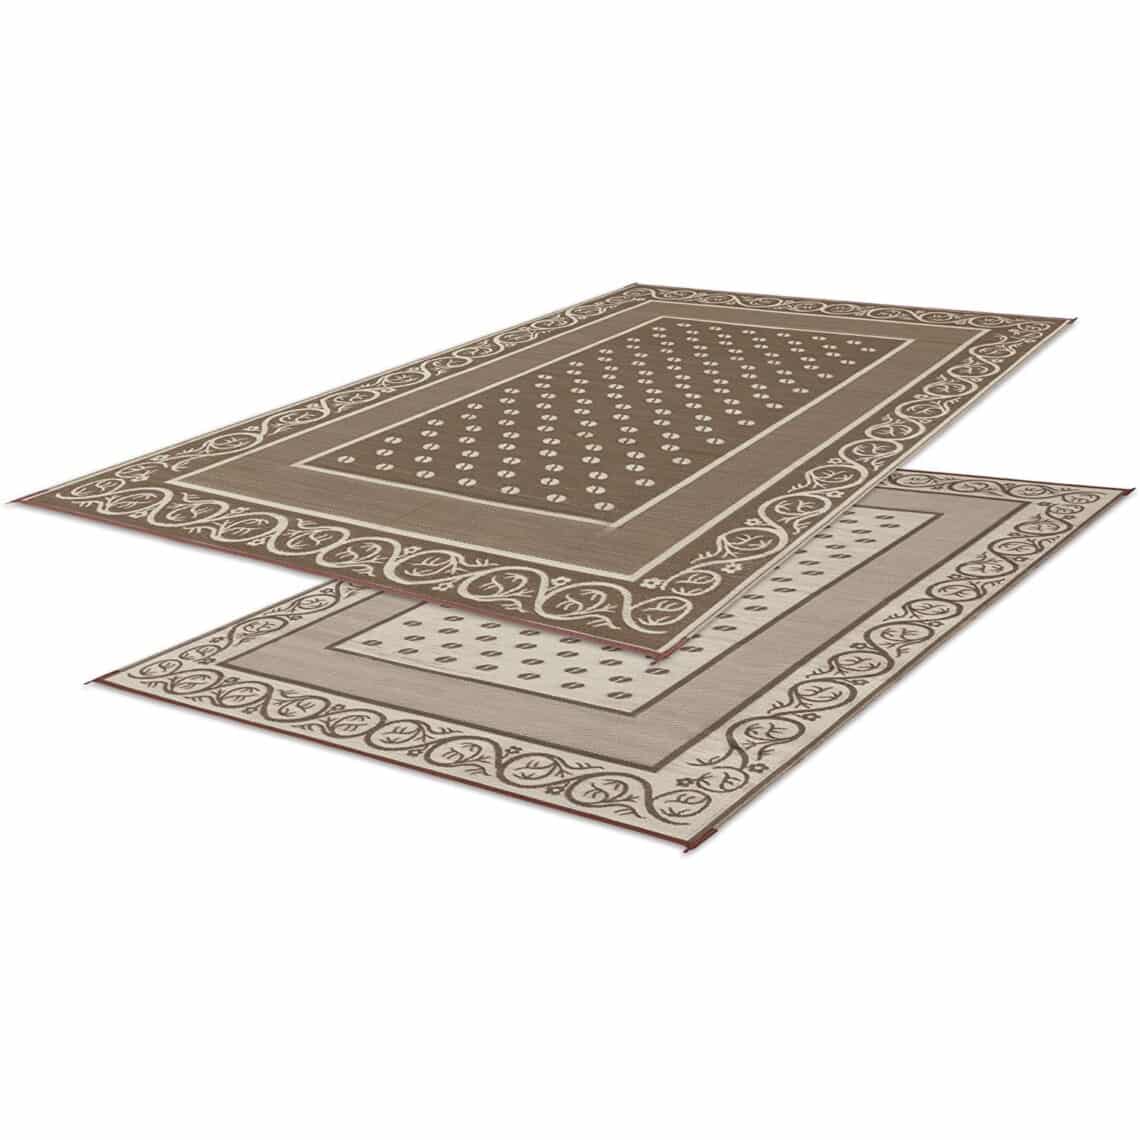 Best RV Patio Mat In 2023 - Top 10 RV Patio Mats Review 